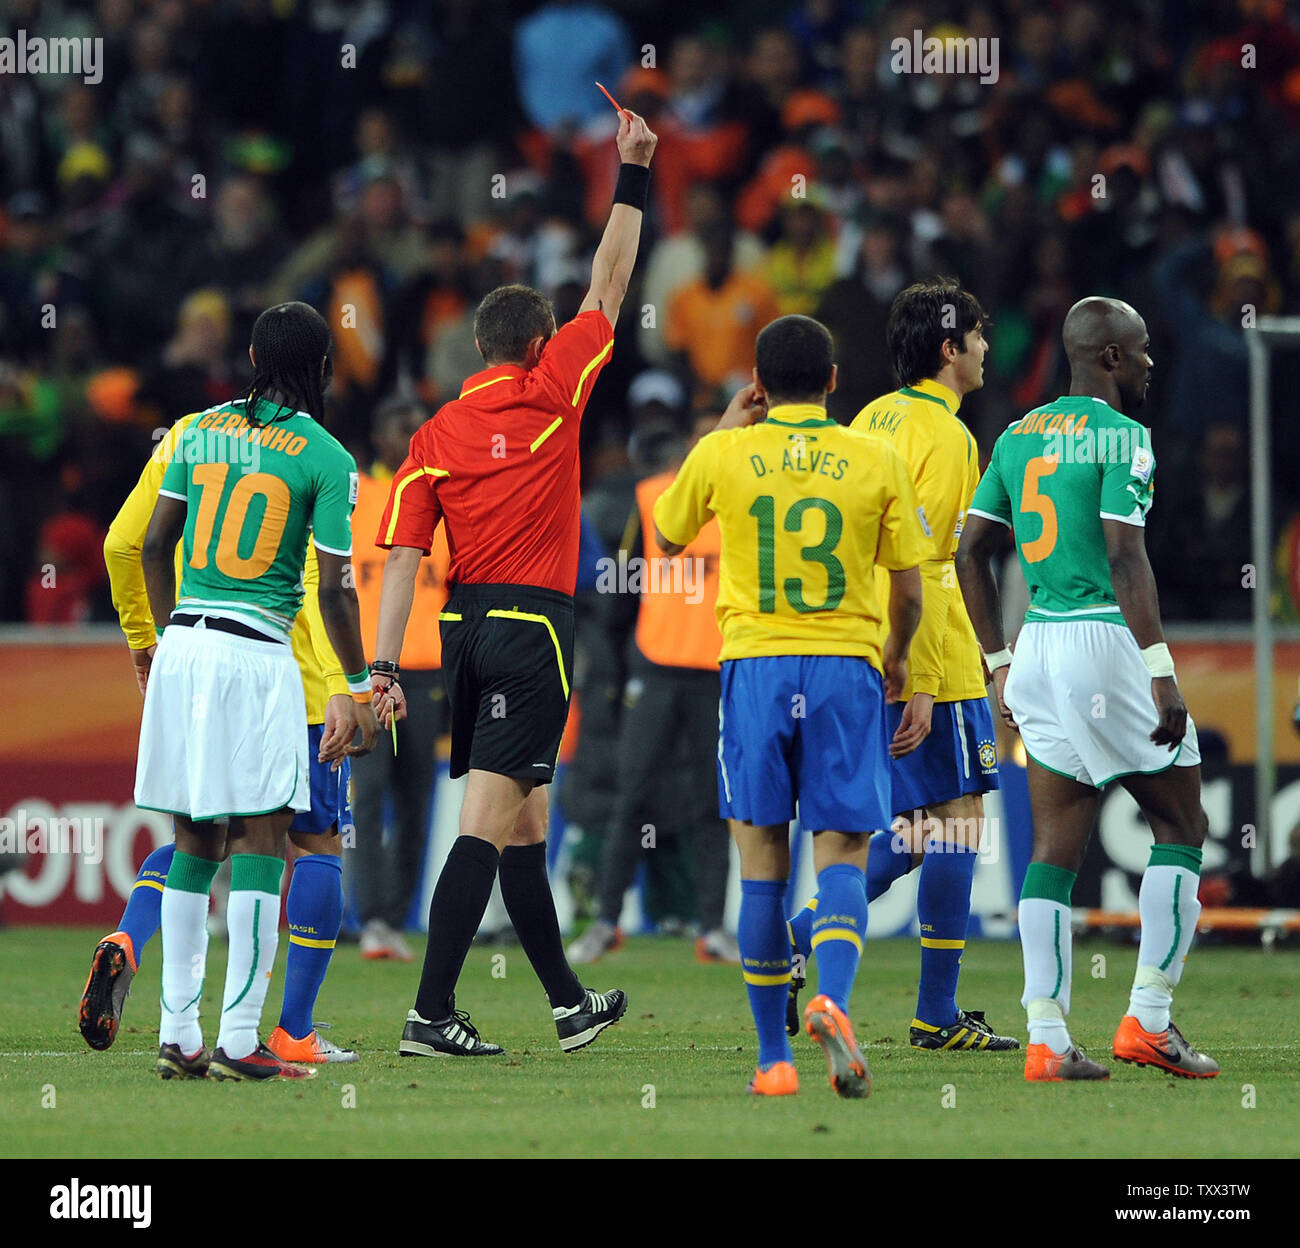 Kaka of Brazil is issued a red card during the Group G match at Soccer City Stadium in Johannesburg, South Africa on June 20, 2010. UPI/Chris Brunskill Stock Photo